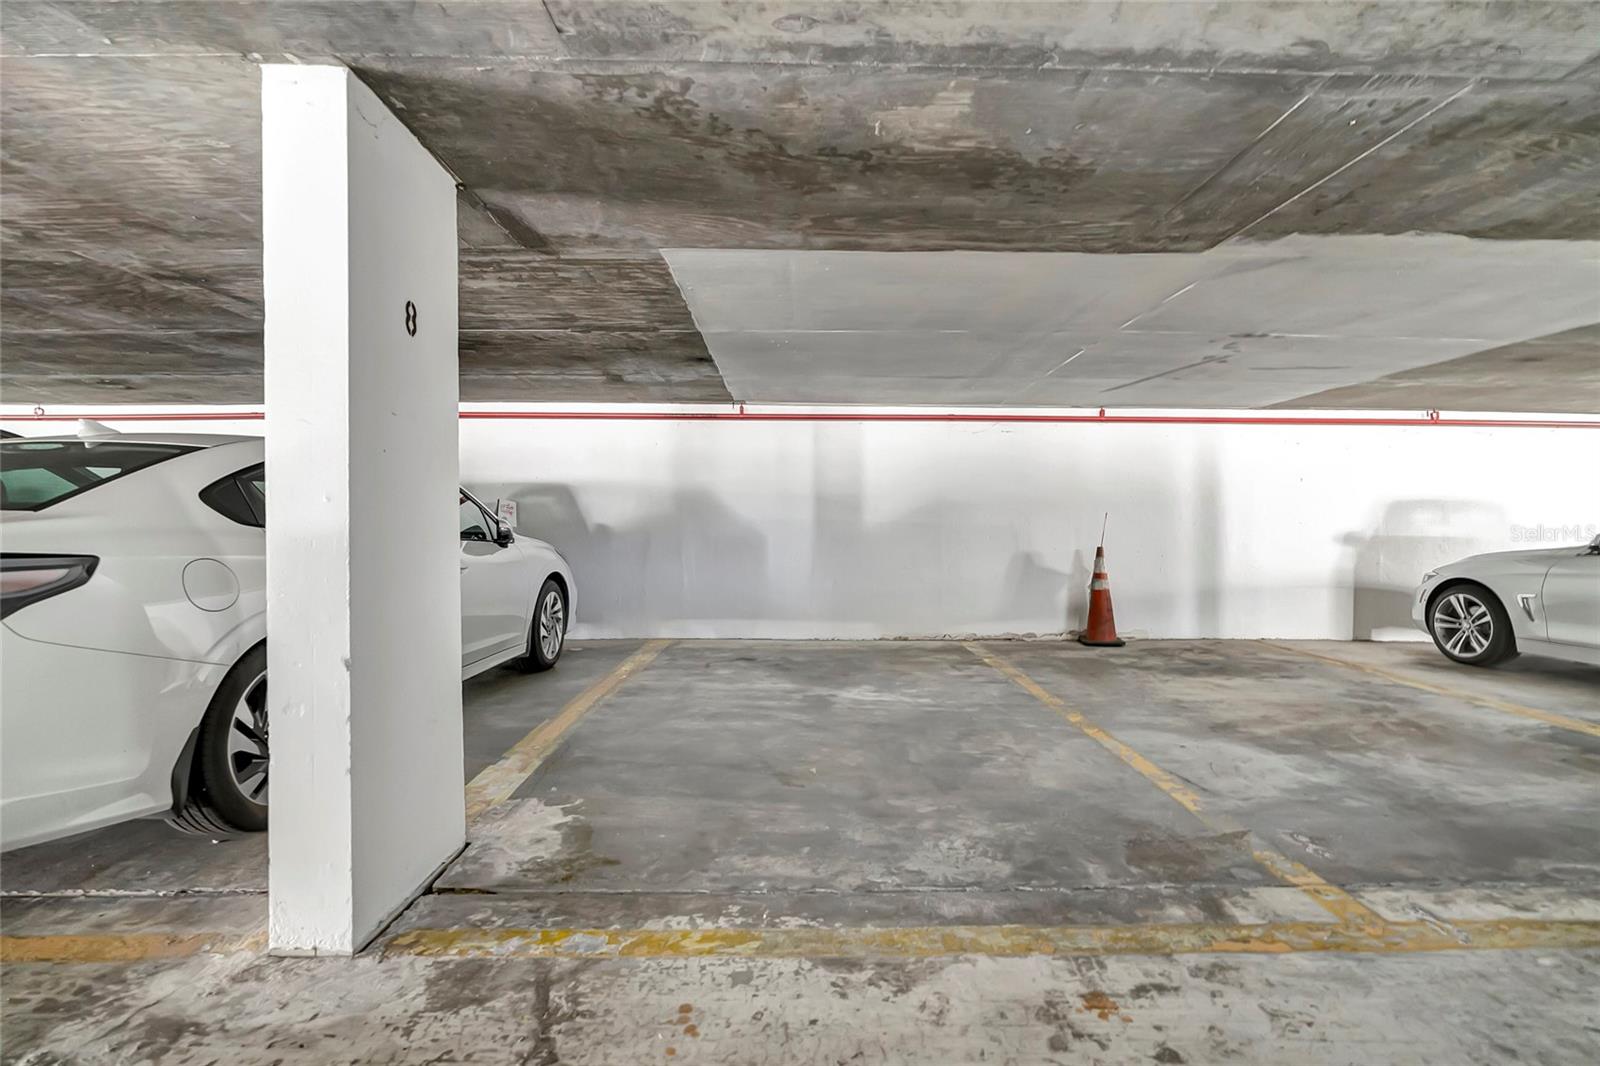 Park your car with peace of mind in our covered parking area, sheltered from the elements for added convenience and protection.